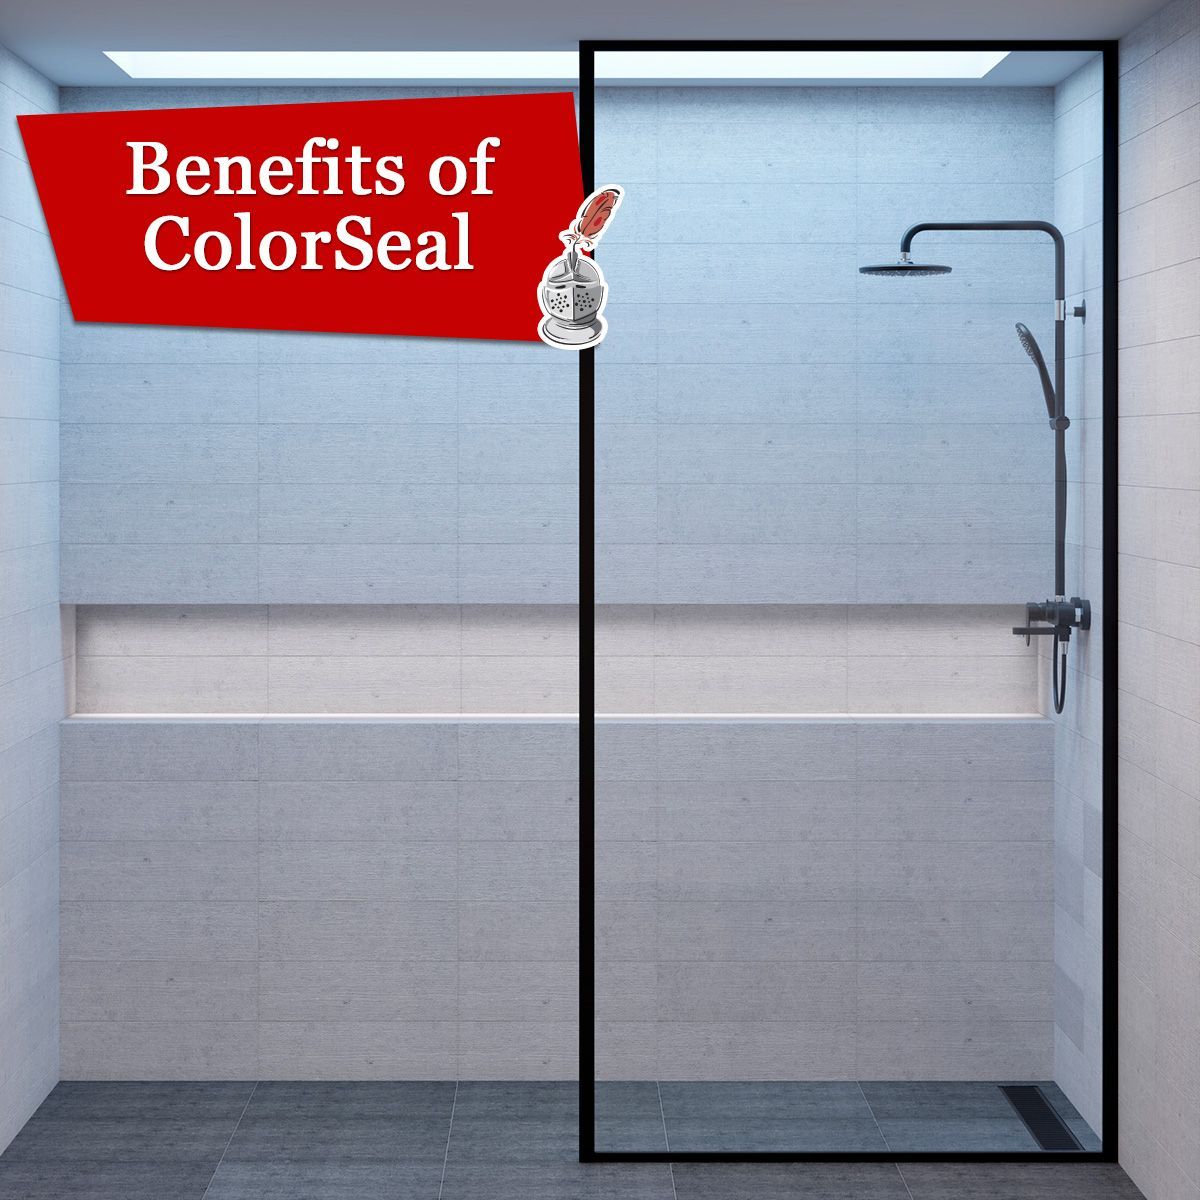 Benefits of ColorSeal